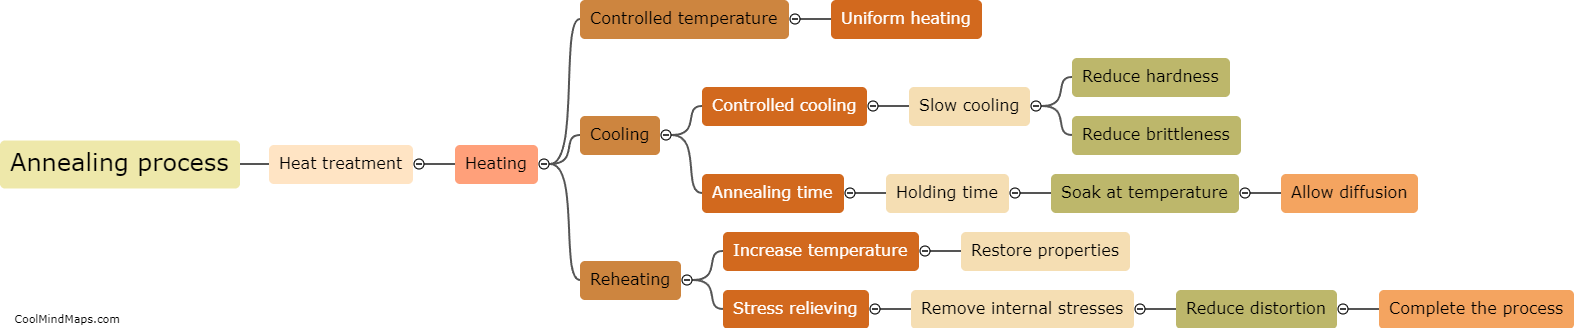 What are the steps involved in the annealing process?